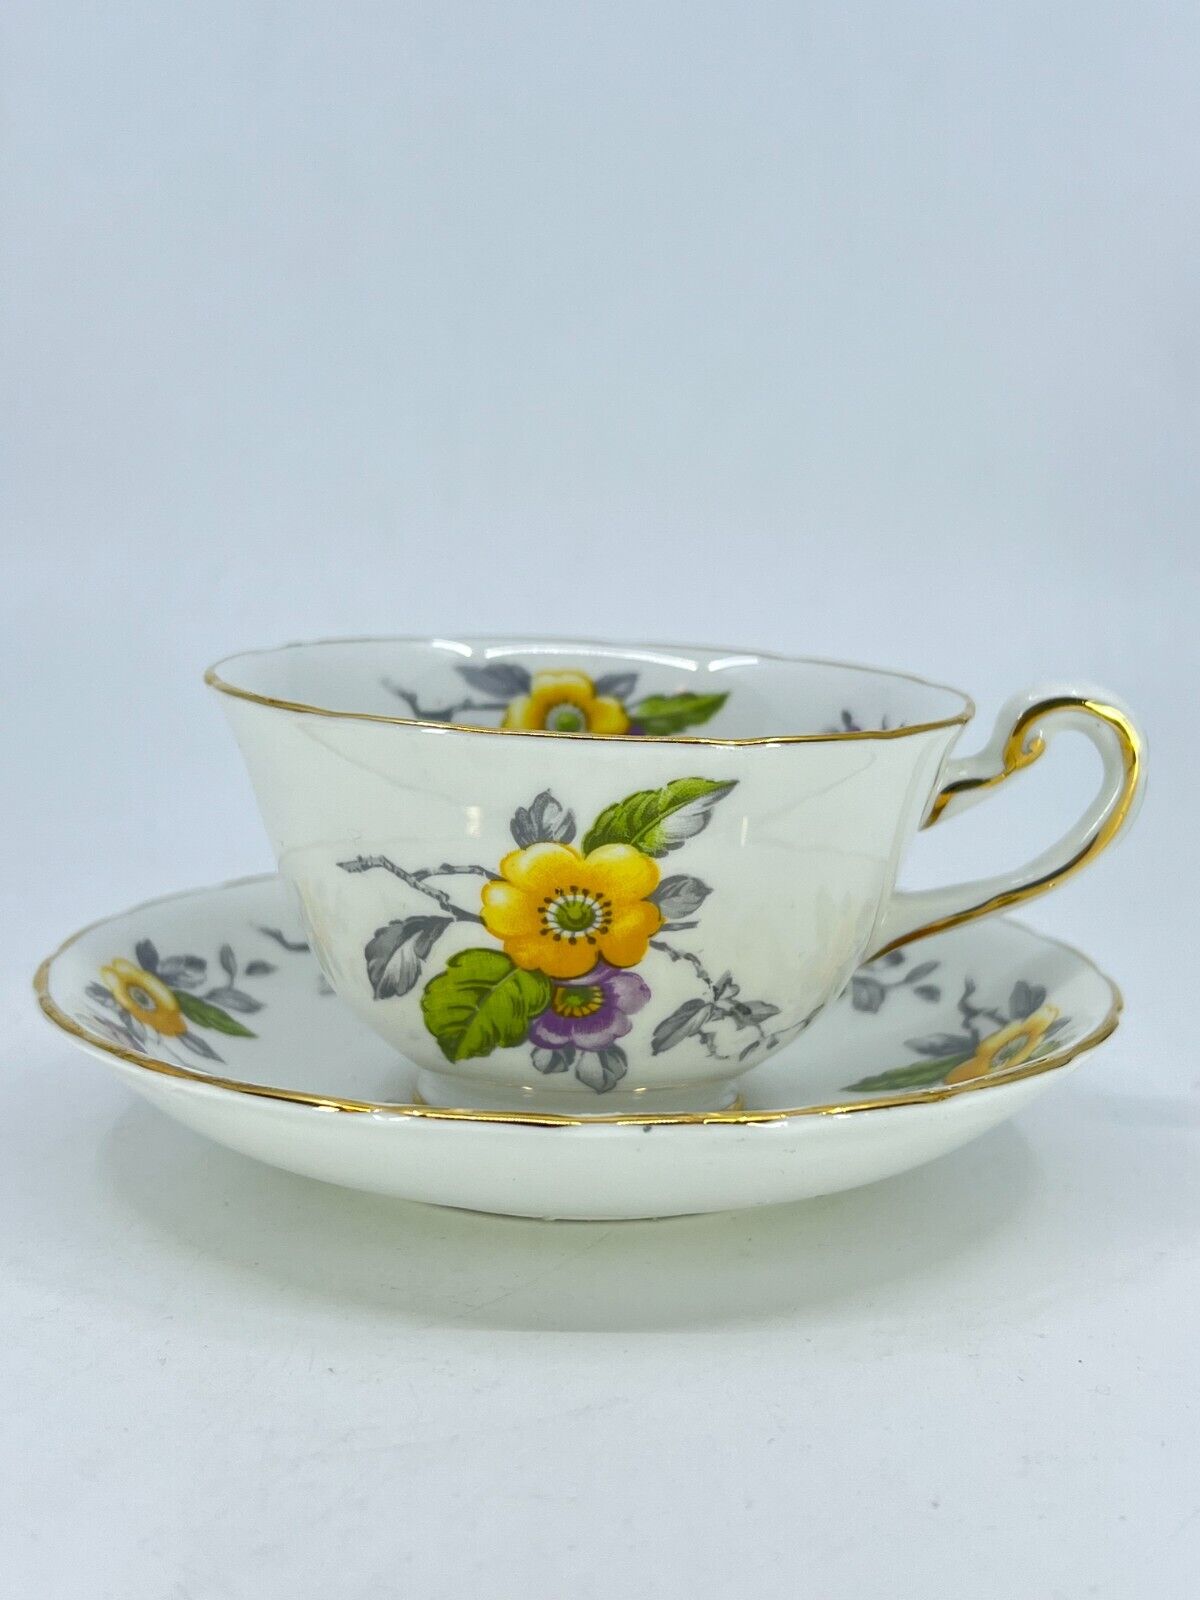 1950s Royal Chelsea Bone China Tea Cup and Saucer Set Yellow Flower UK Made VTG